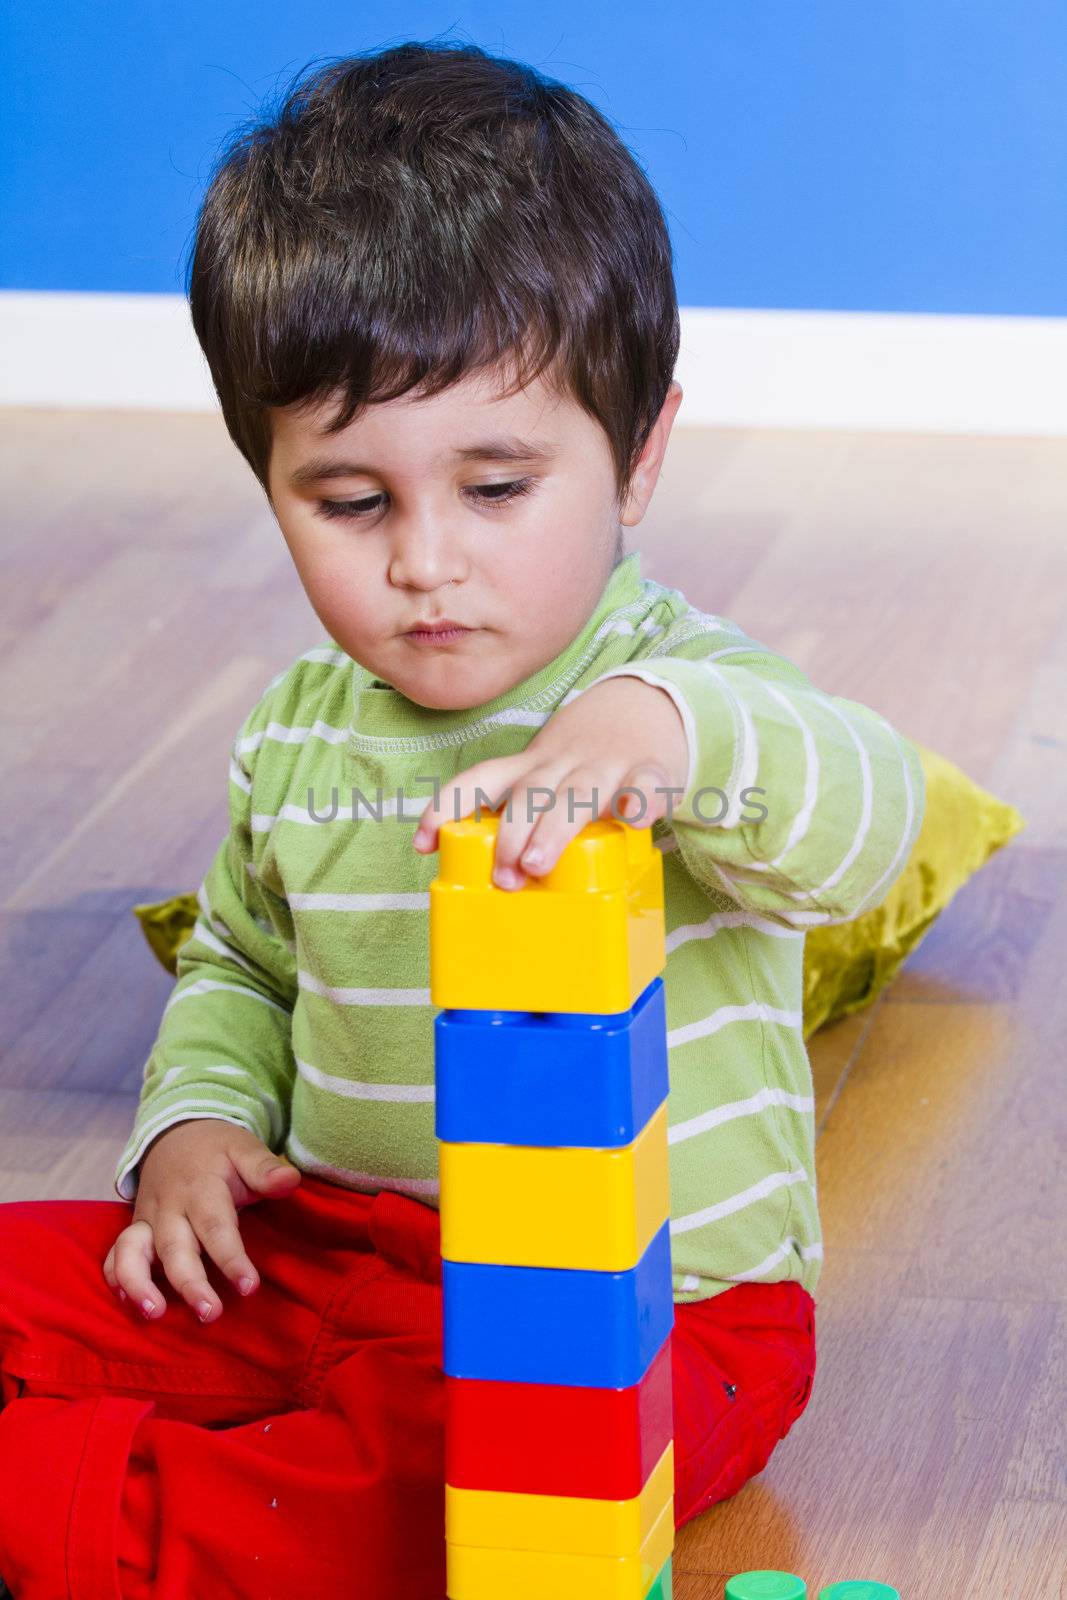 Little baby boy (2 years old) playing with toy blocks. Funny edu by FernandoCortes